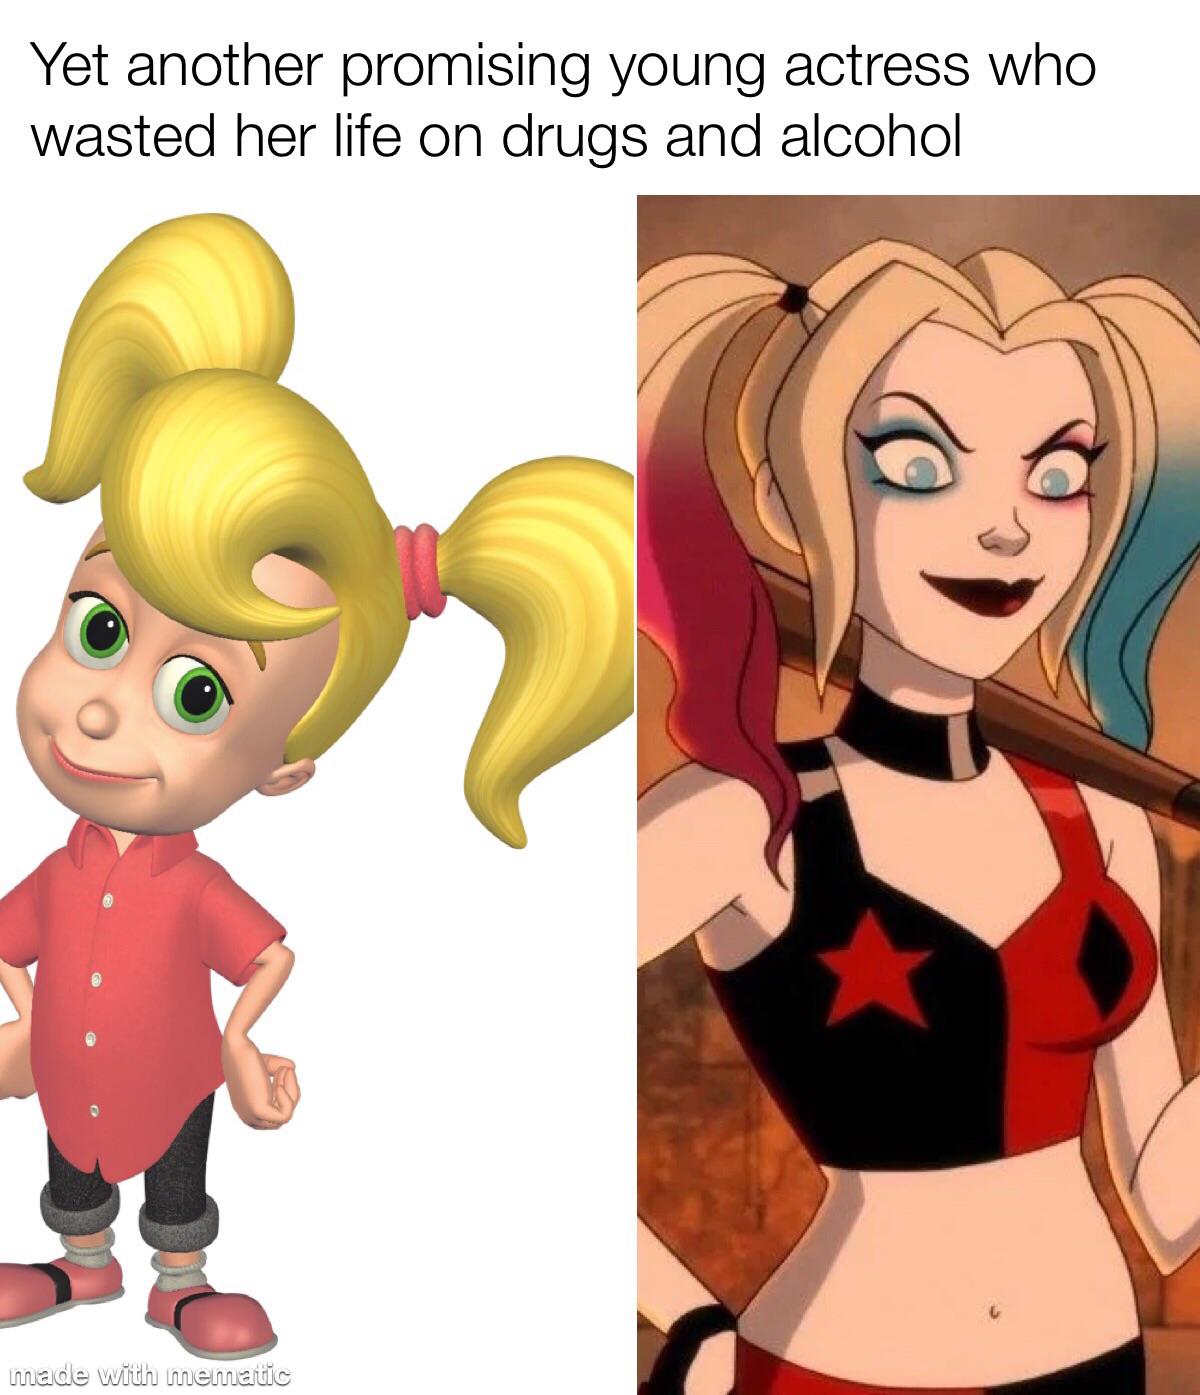 dank memes - cartoon - Yet another promising young actress who wasted her life on drugs and alcohol made with mematic